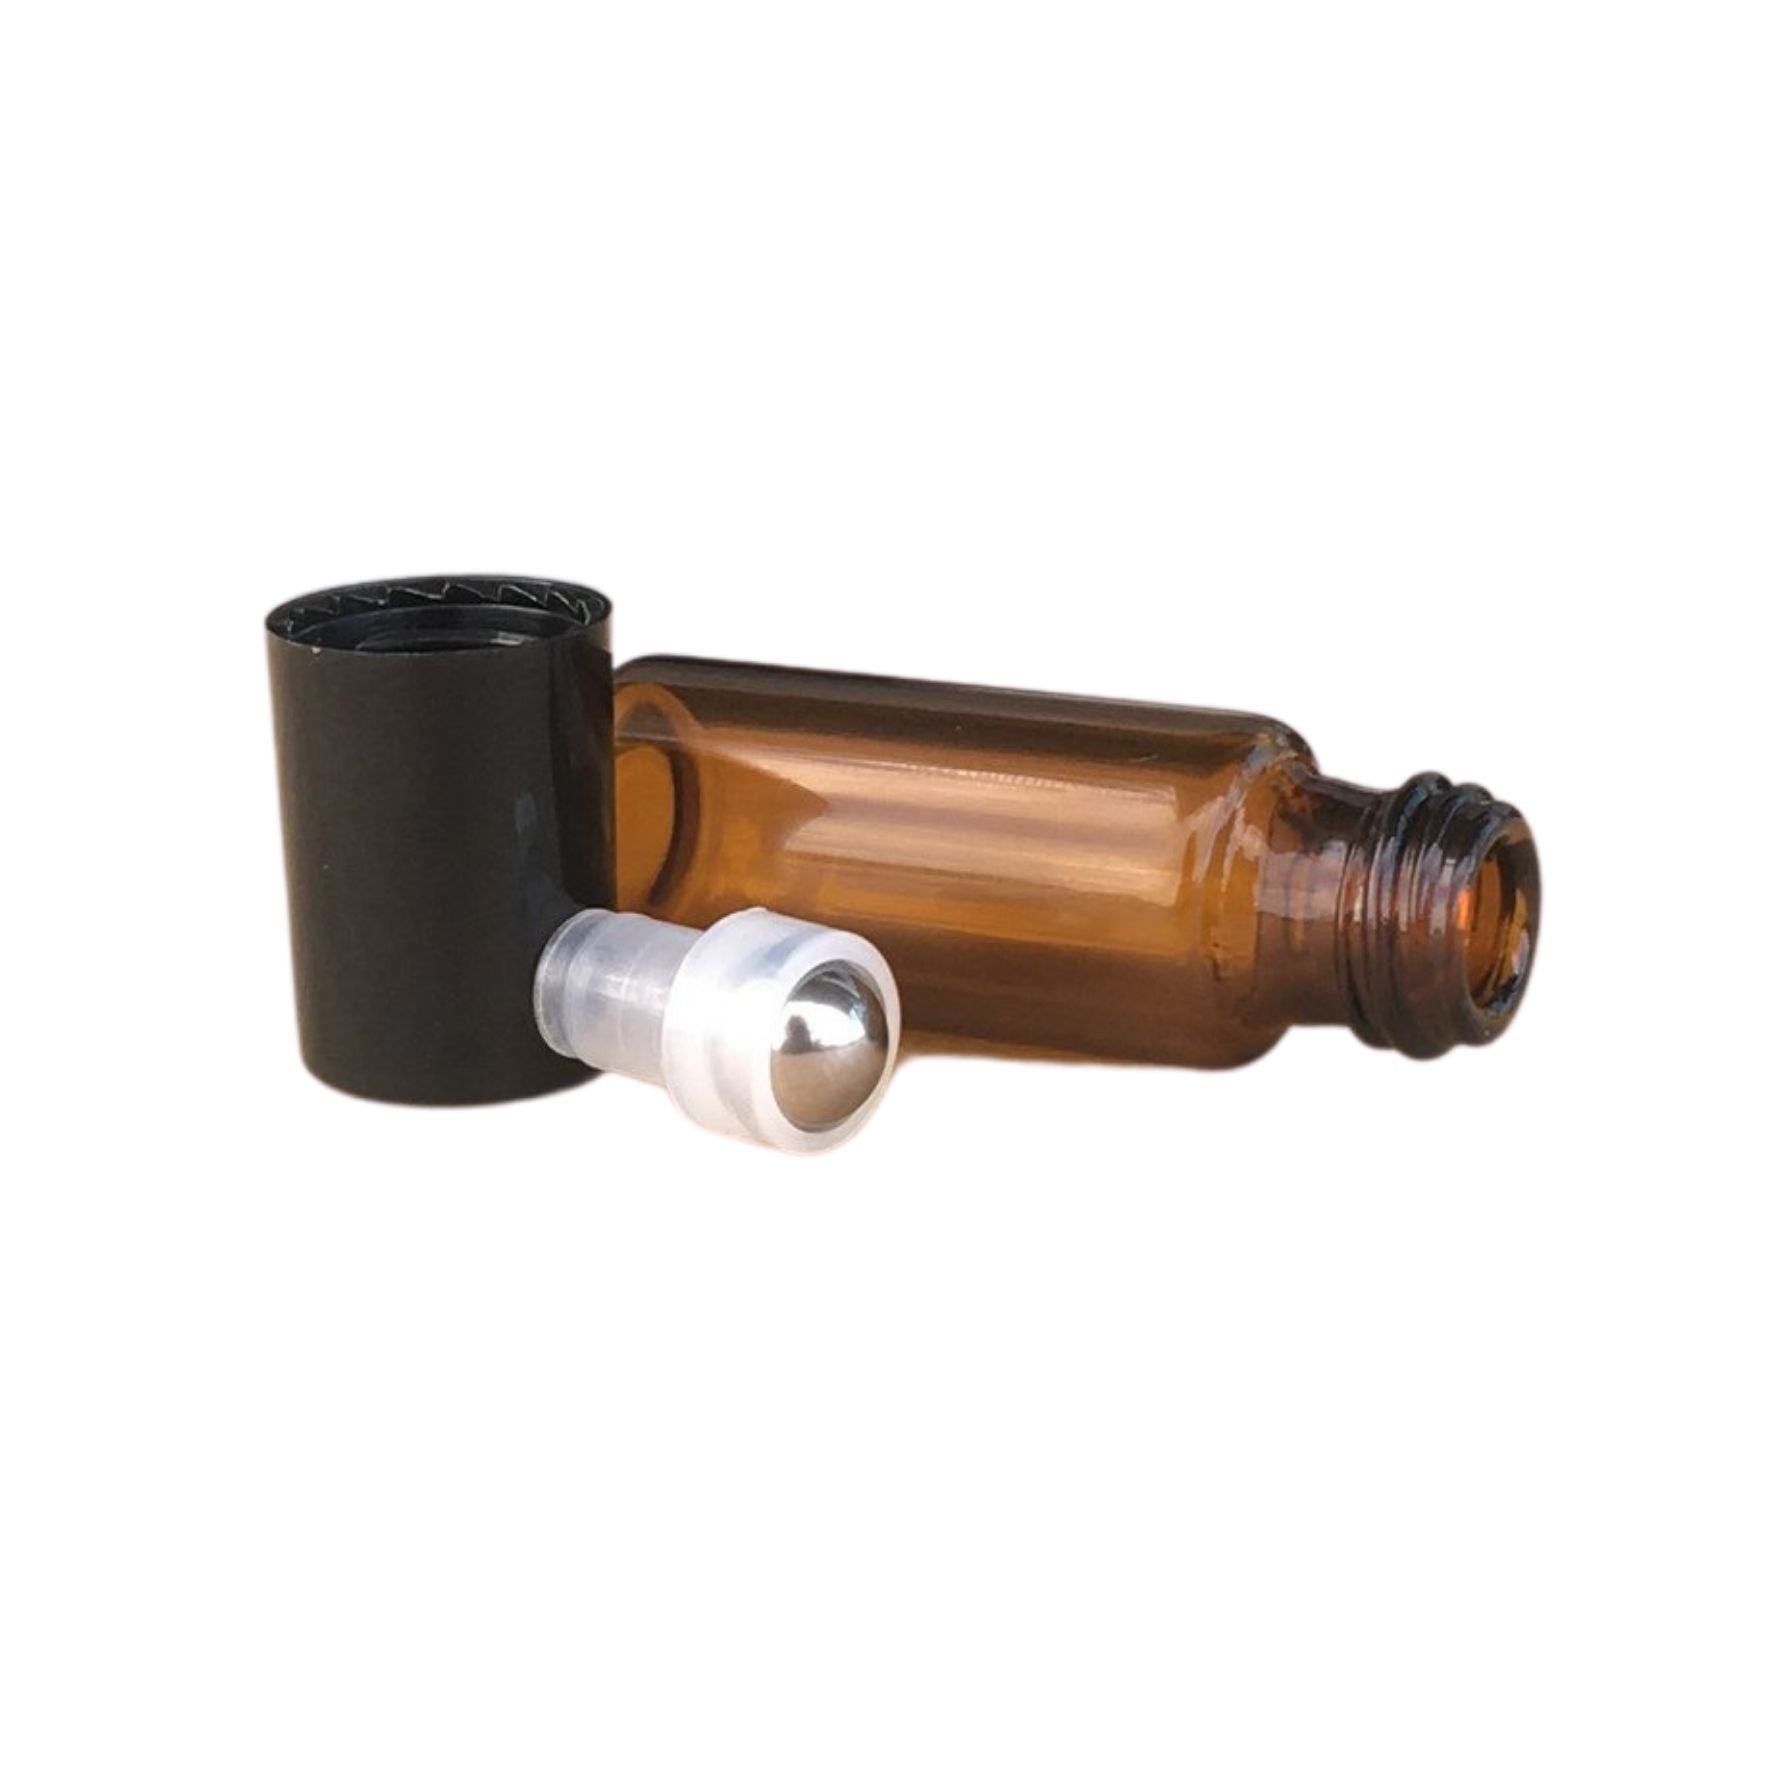 Empty Glass Roller Bottle for remedies or perfumes